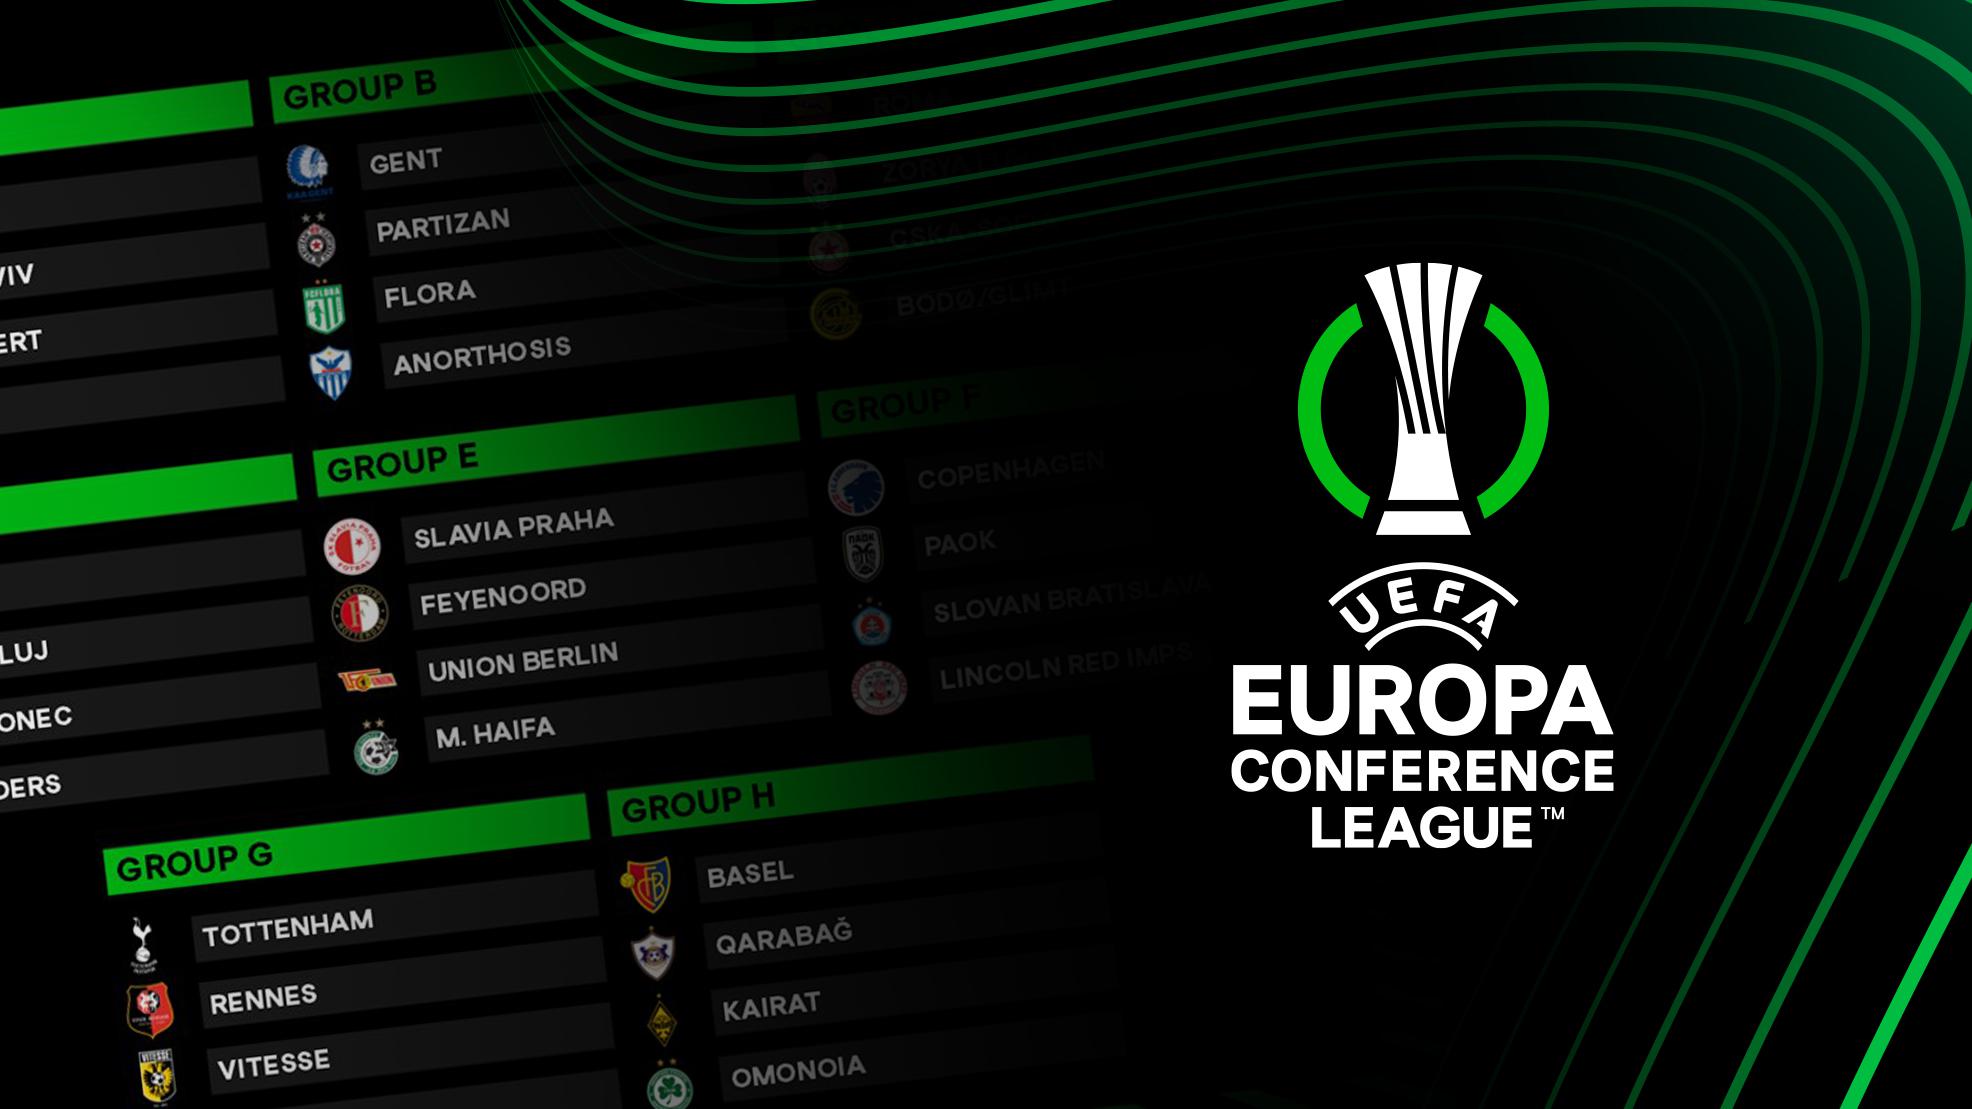 Download Uefa Europa Conference League 2021/22 Background